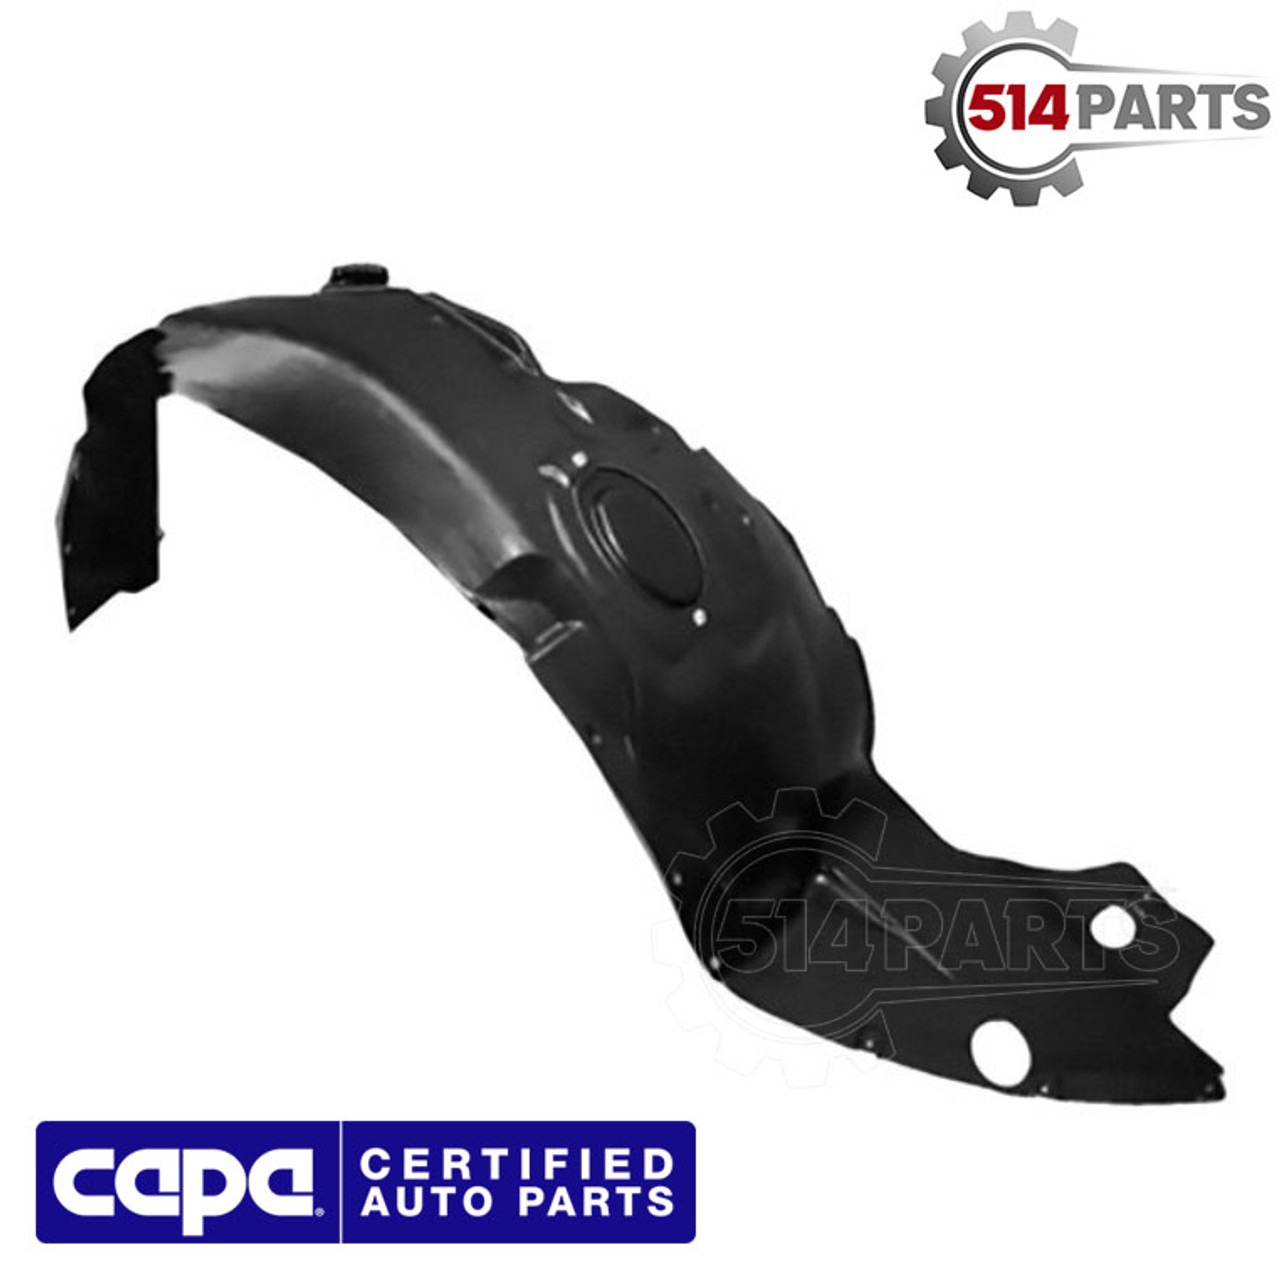 2006 - 2009 FORD FUSION FENDER LINER CAPA - FAUSSE AILE CAPA